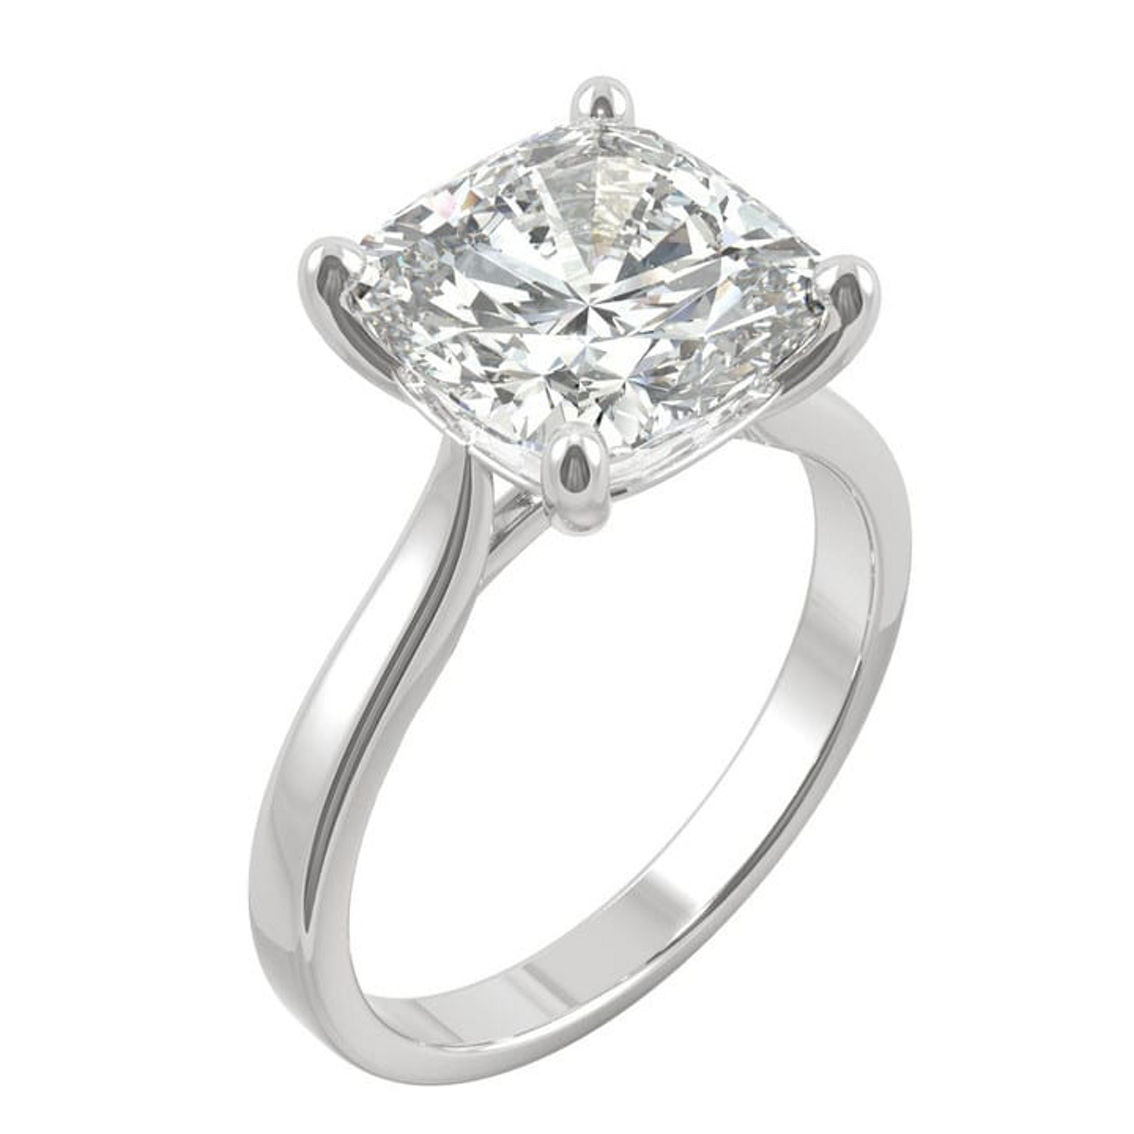 Charles & Colvard 4.20cttw Moissanite Cushion Solitaire Ring in 14k White Gold - Image 2 of 5